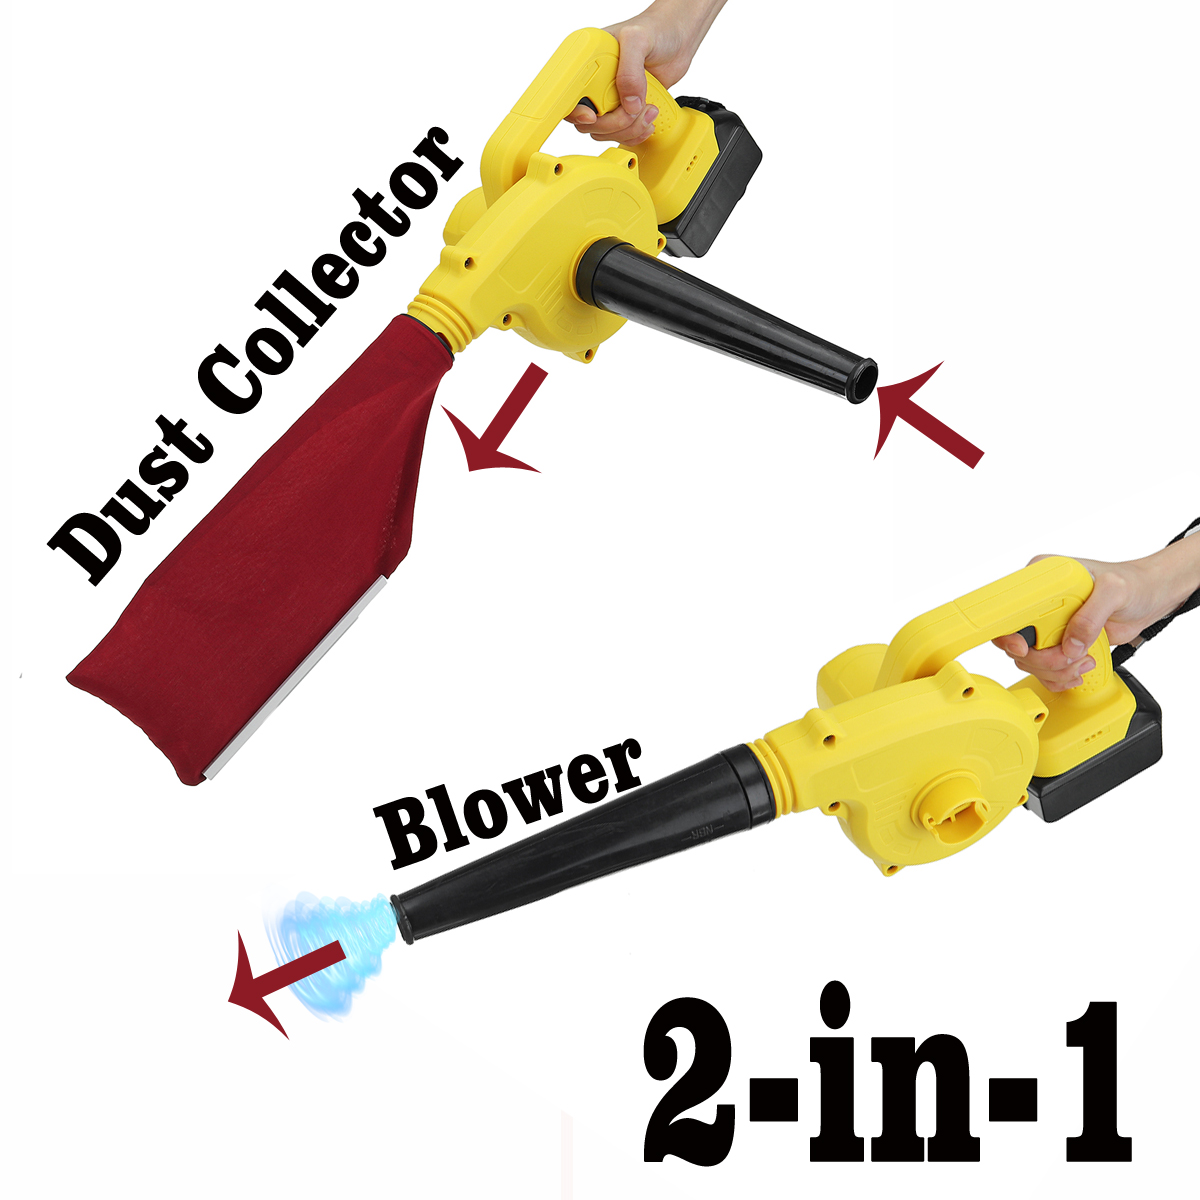 2200W-2In1-24ah-Rechargeable-Electric-Air-Blower-Home-Car-Air-Vacuum-Blower-Leaf-Dust-Sustion-Collec-1857528-7